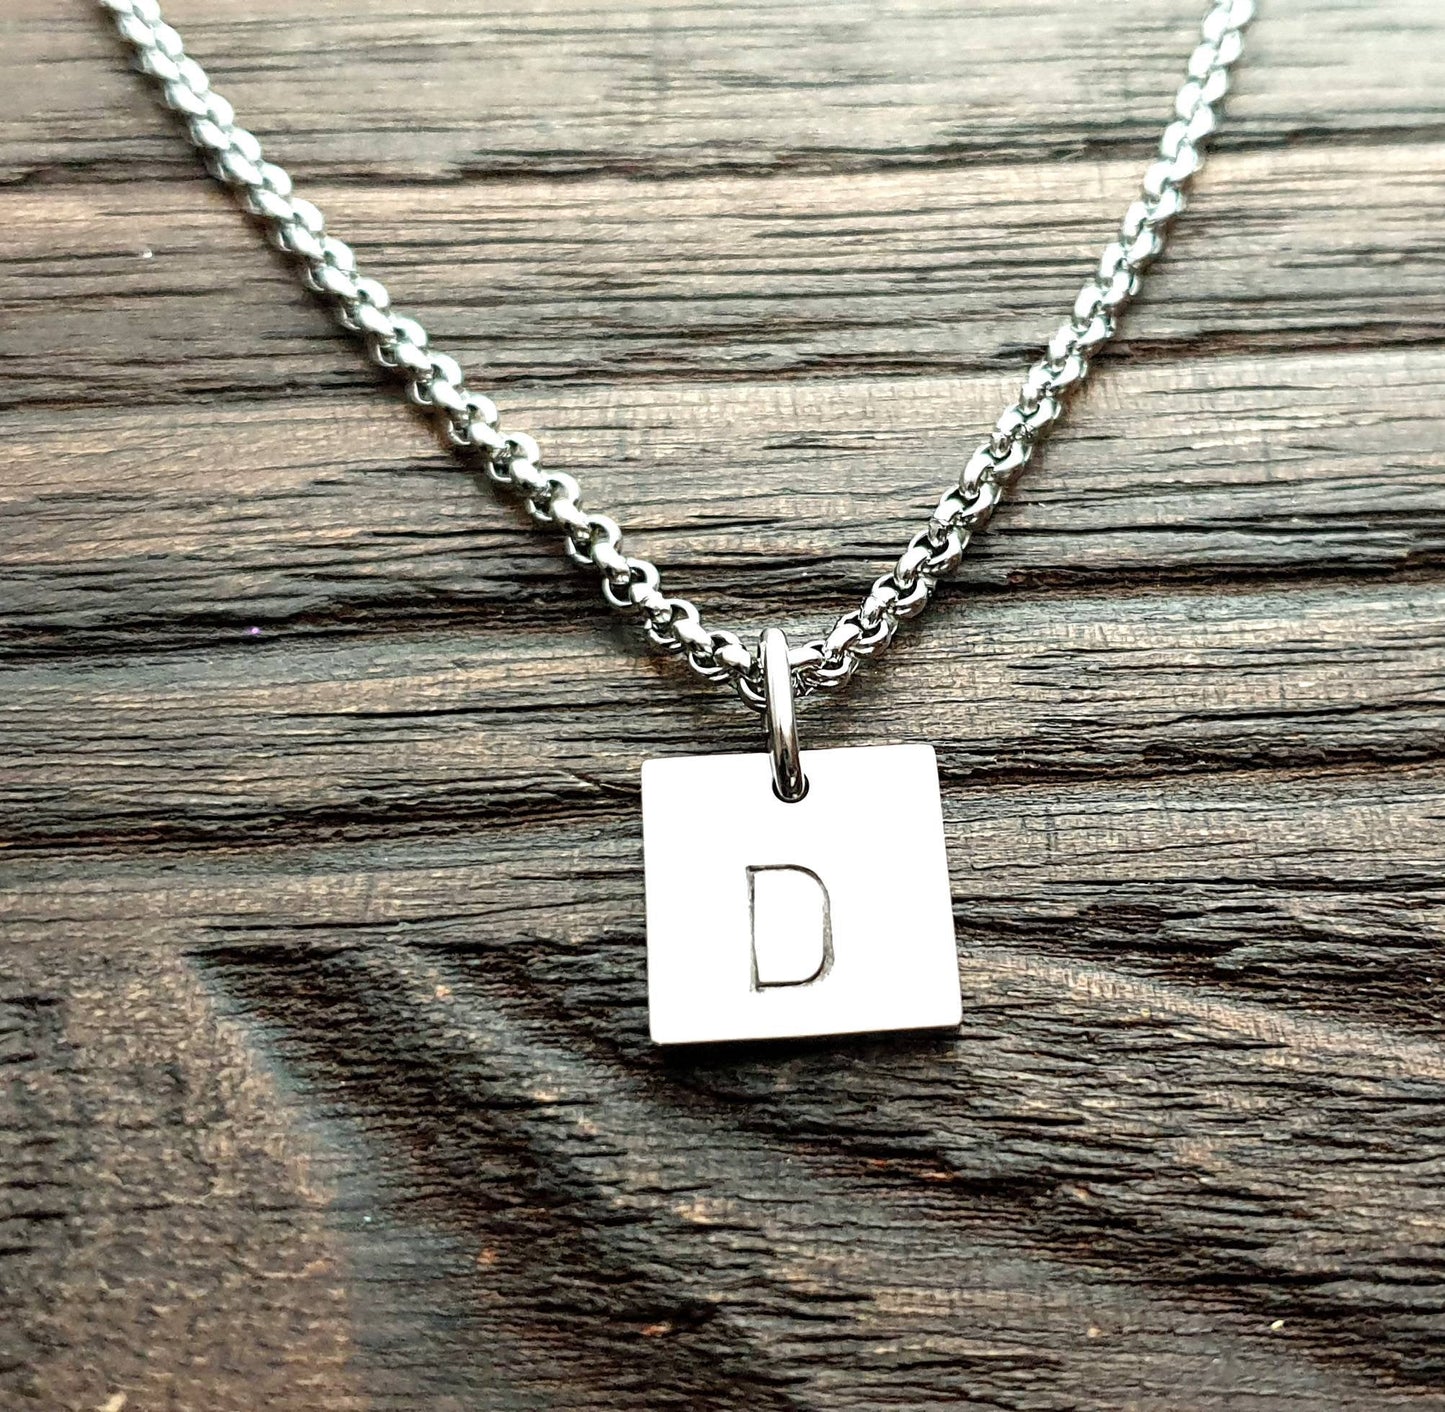 Personalised Square Necklace, Minimalist Necklace, Hand Stamped Name Necklace add Name, Date or Initials